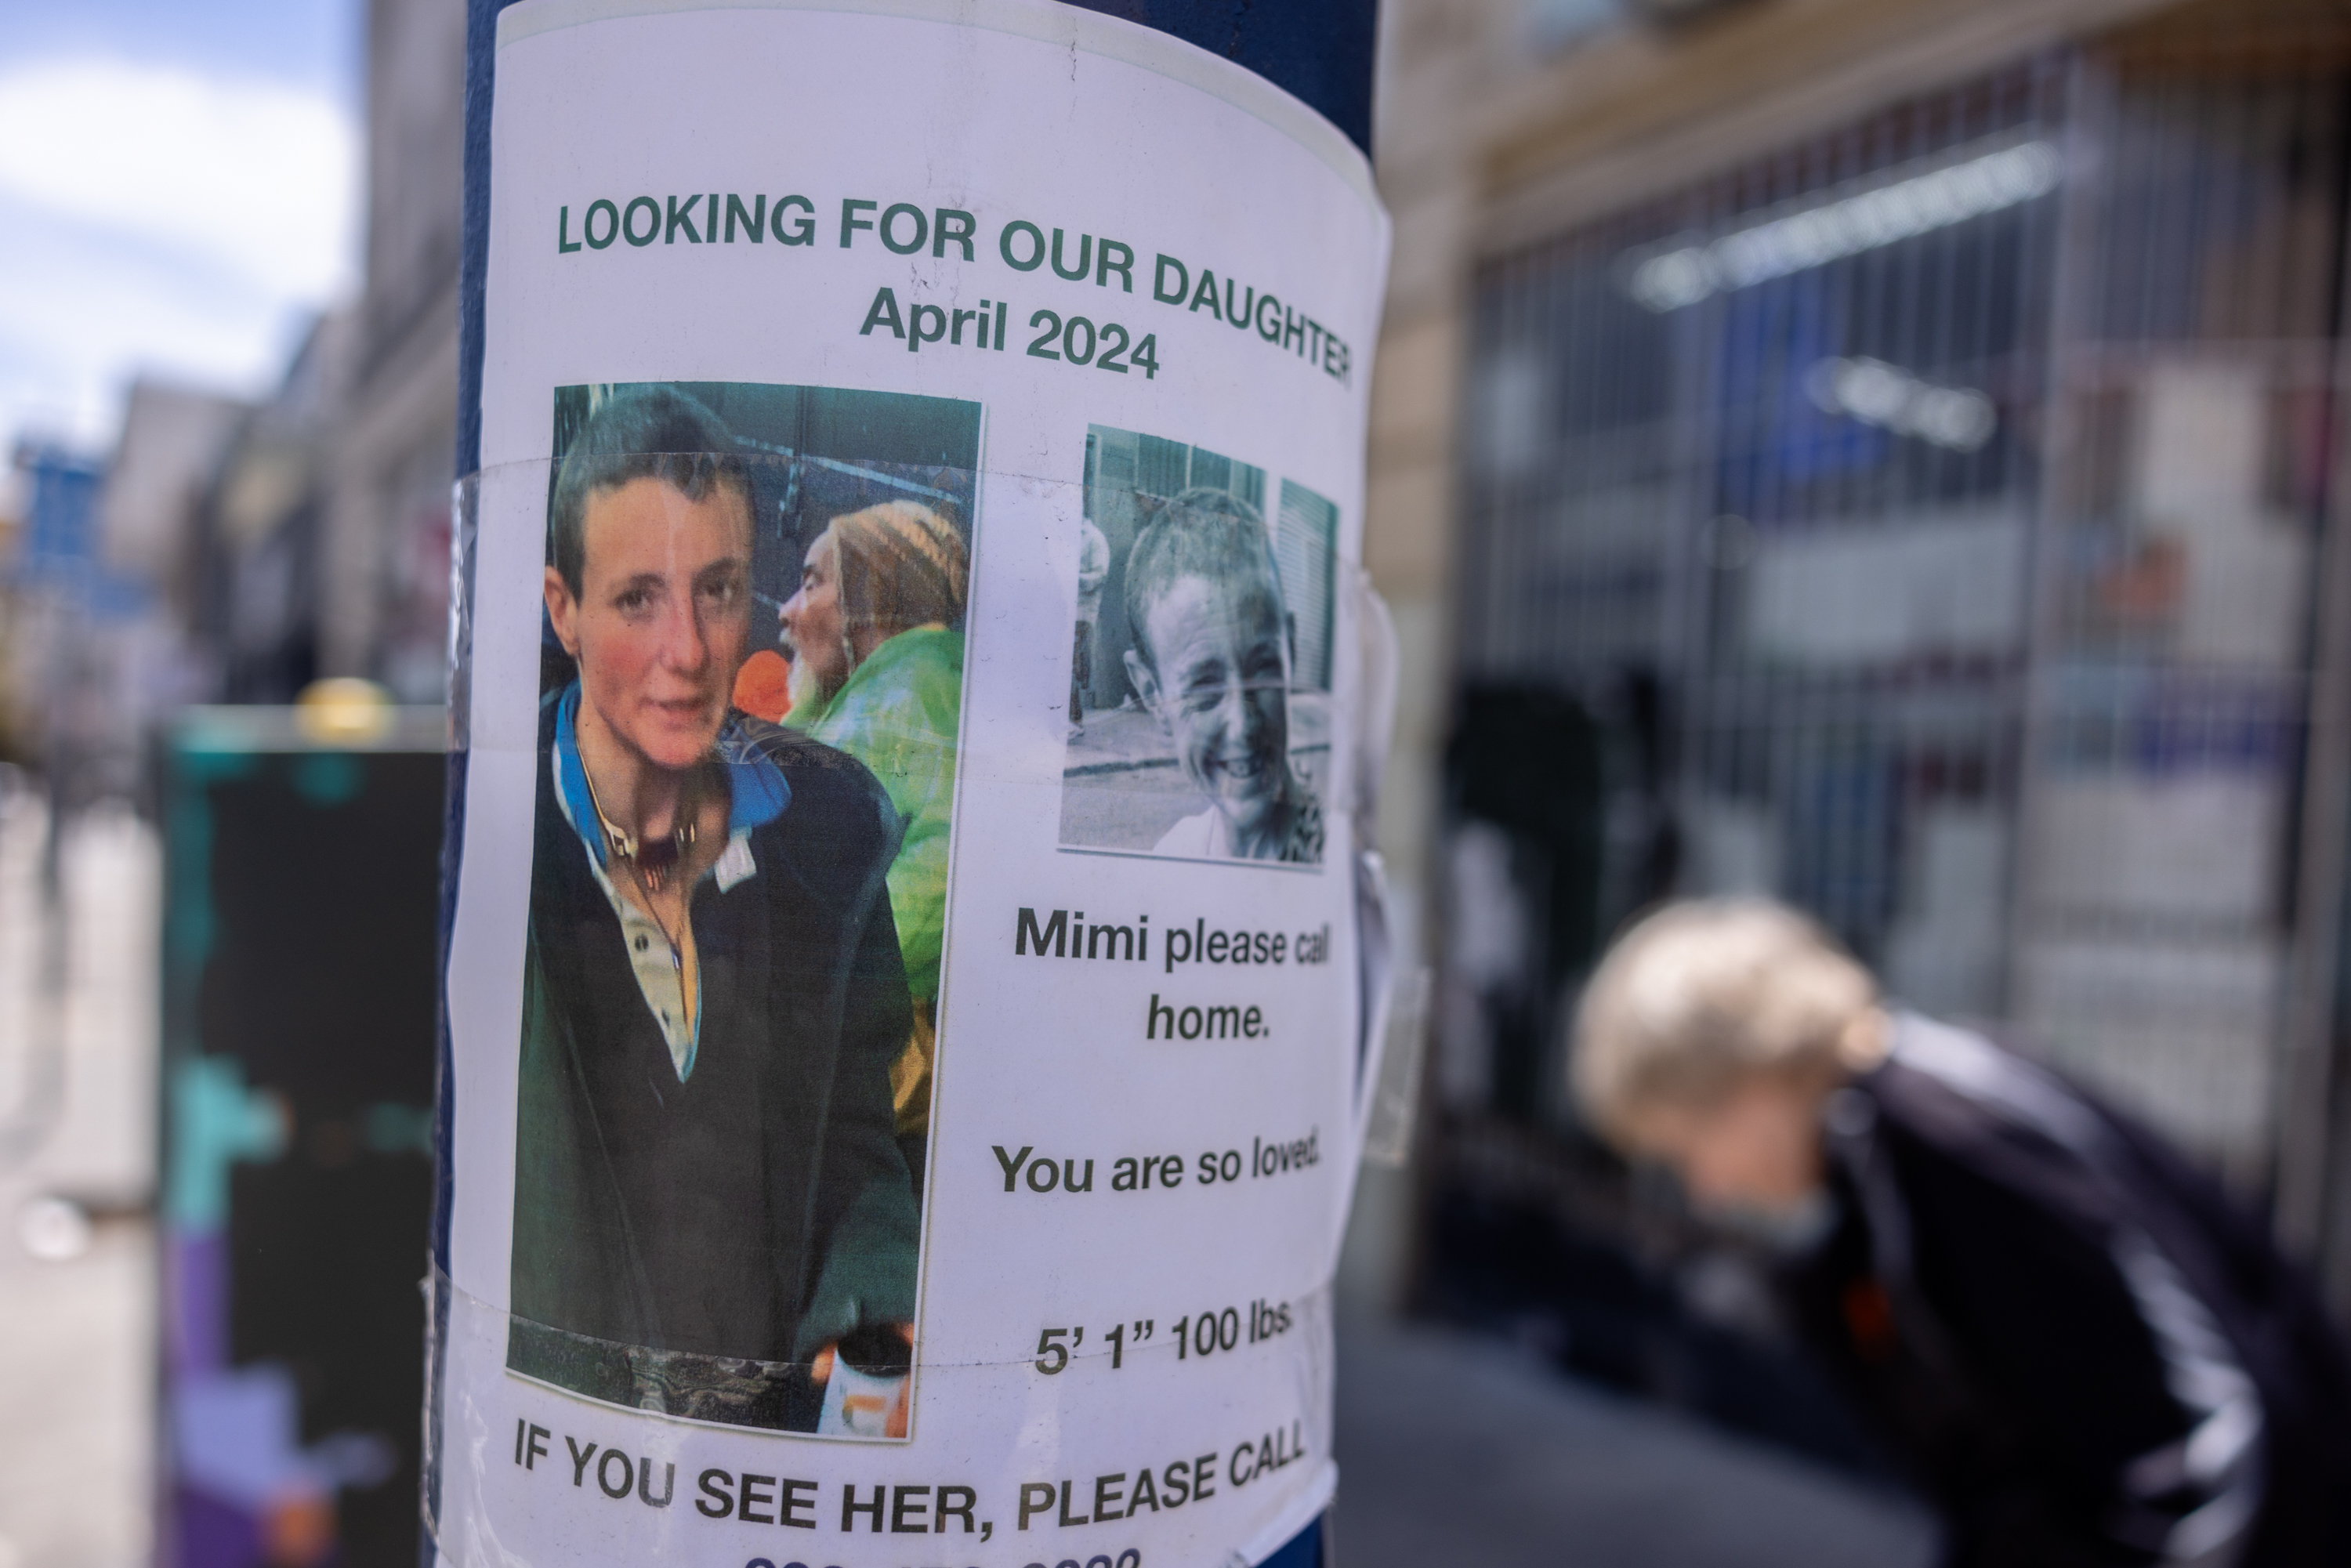 A missing daughter's poster is attached to a pole with photos and contact details.